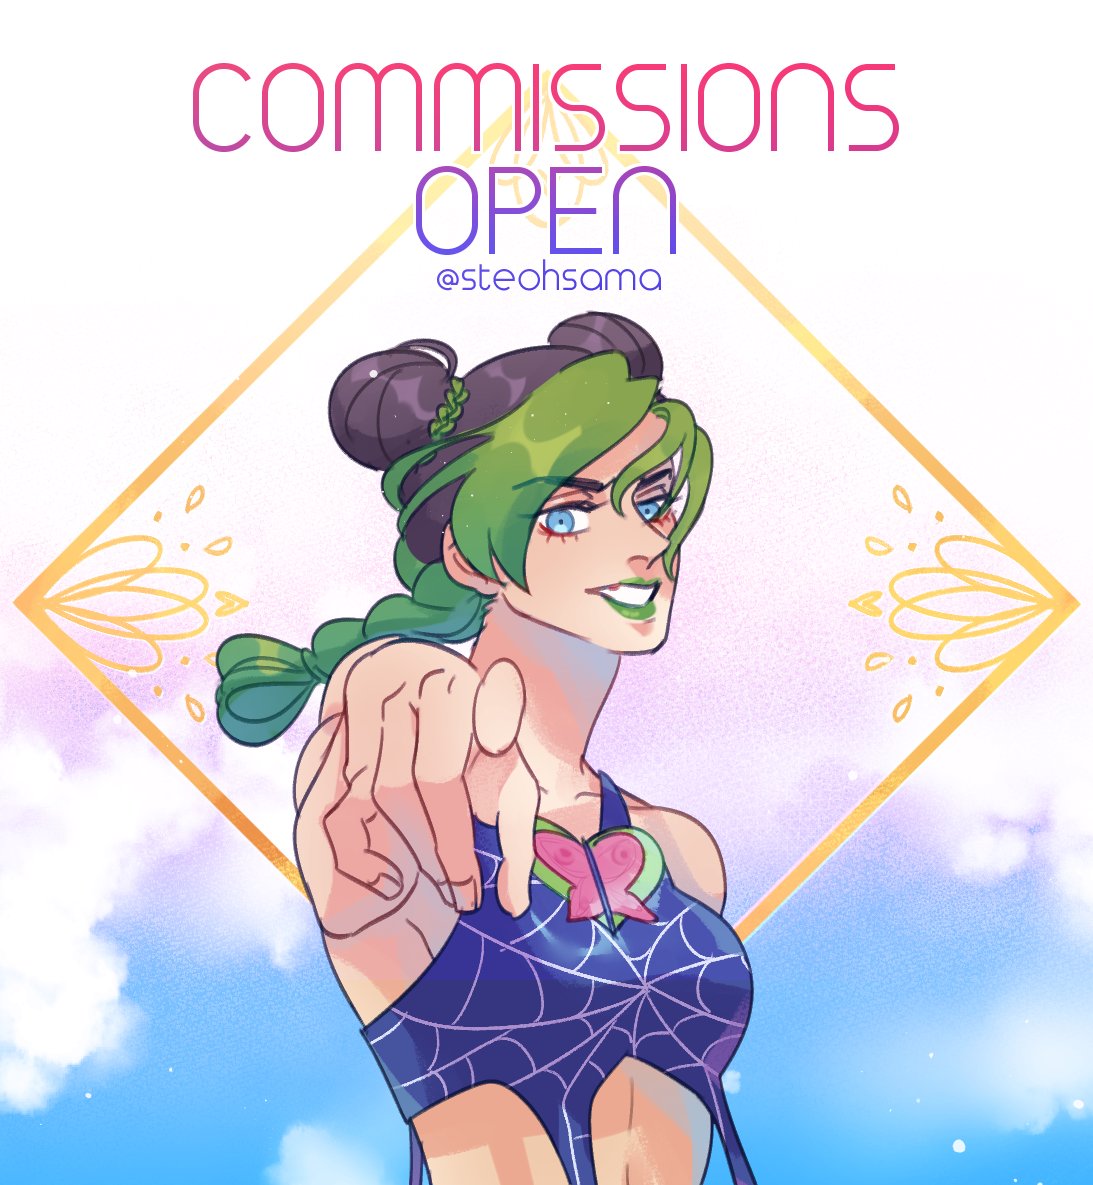 ✨《 COMMISSIONS OPEN! 》✨
hello friends! I'm opening commissions again. not fcfs this time - please fill out the form (link in replies) if interested! accepting forms until all slots are filled or until Nov. 1st 